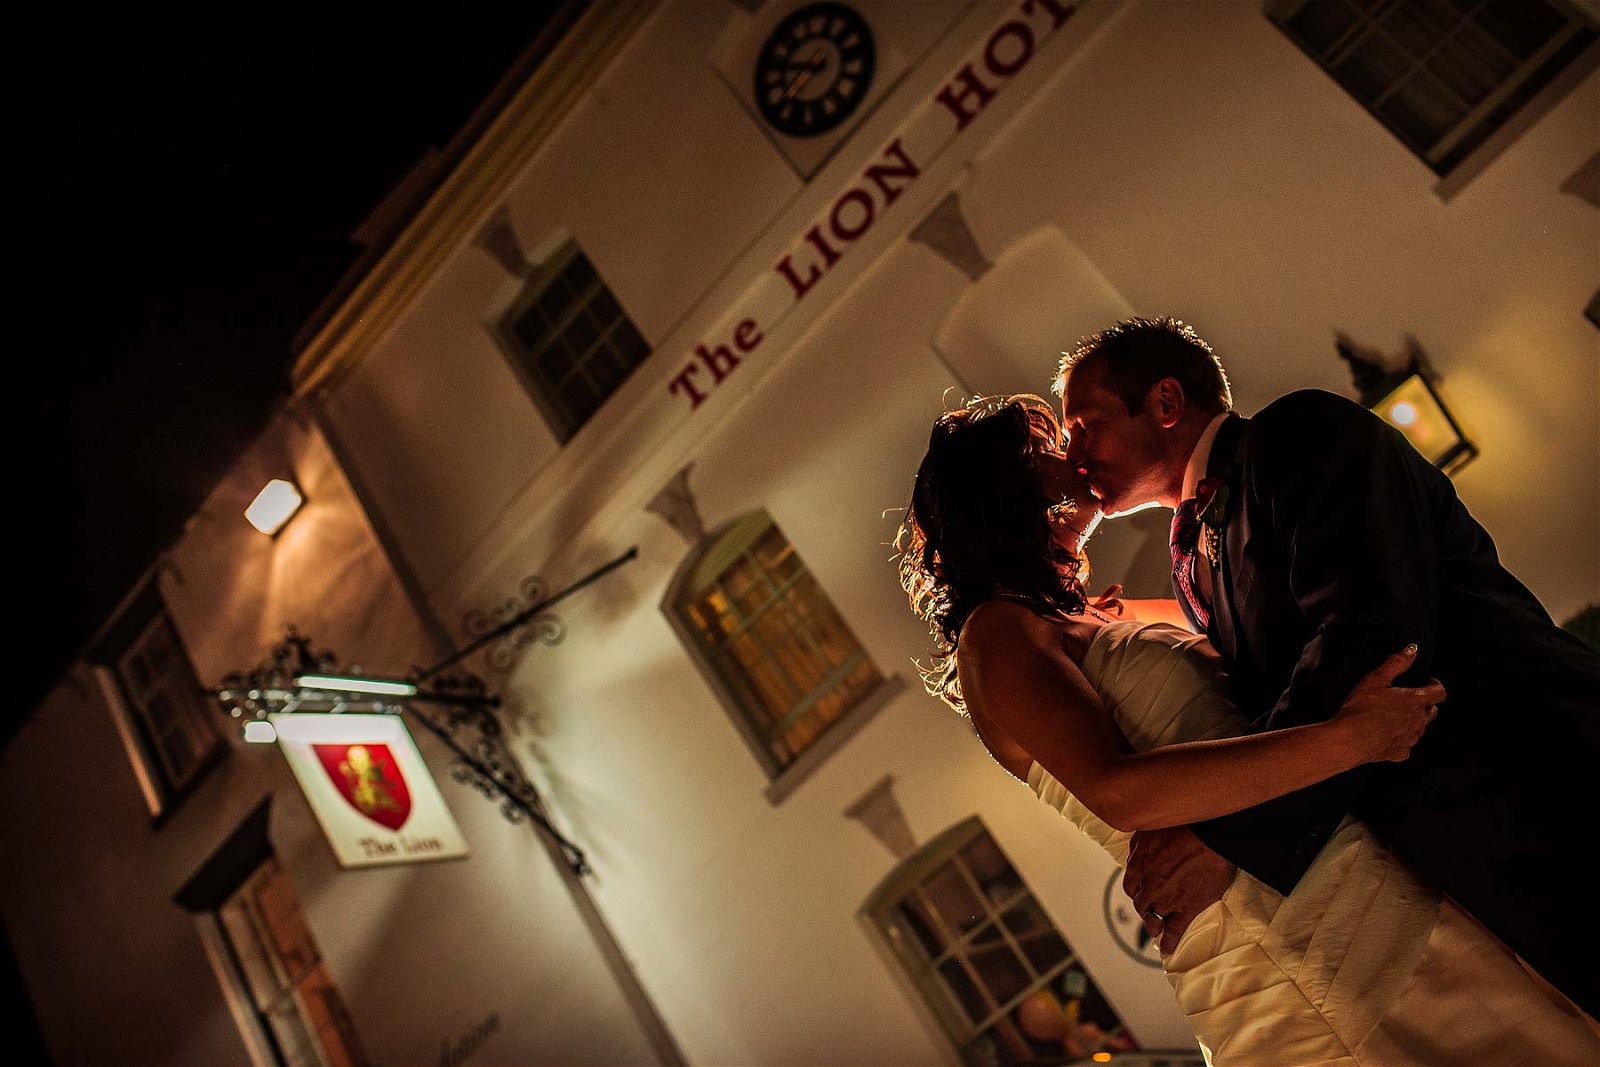 Creative modern wedding photography at The Lion Hotel in Brewood by Documentary Wedding Photographer Stuart James